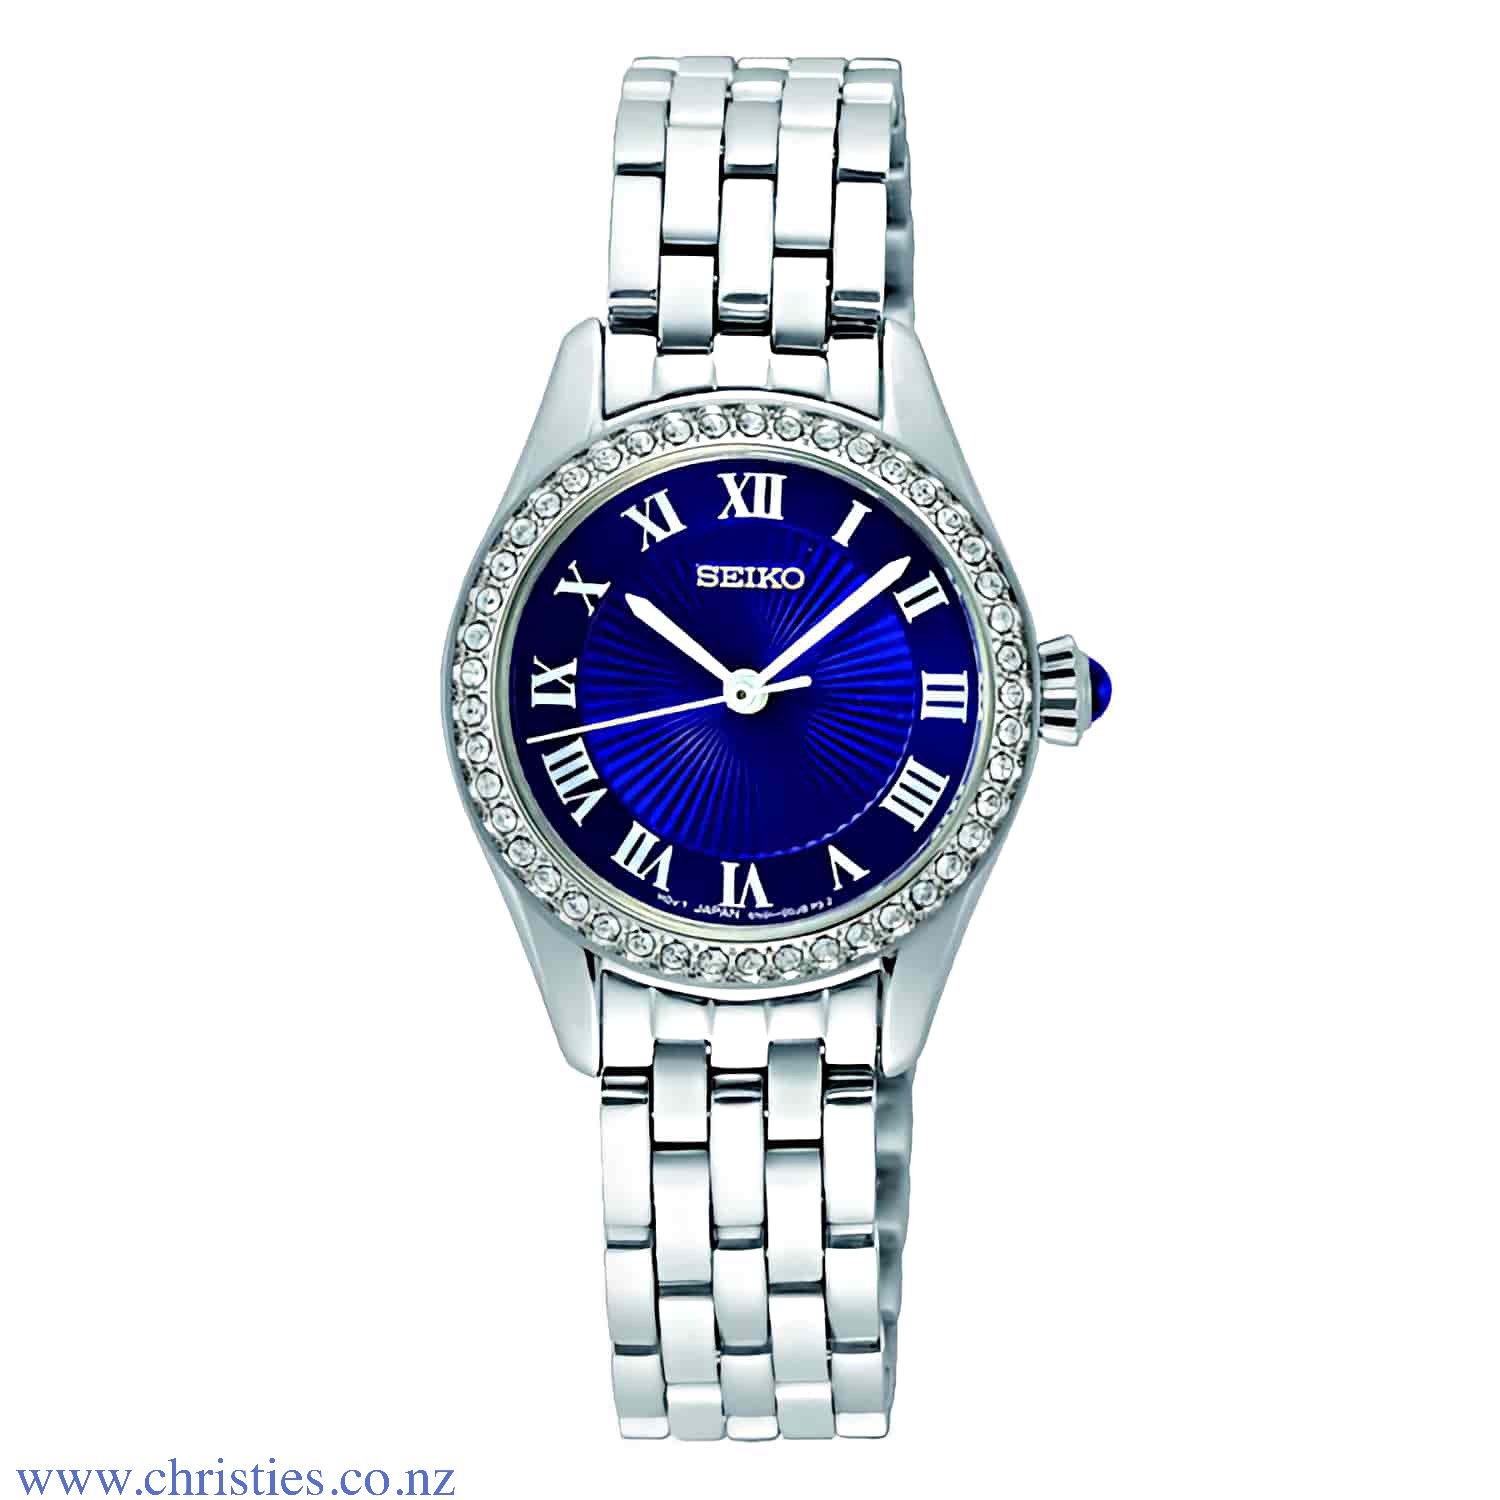 SUR335P Seiko Ladies Diamond Accents Watch. SUR335P Seiko Ladies watch featuring a stunning blue dial and diamond Accents Afterpay - Split your purchase into 4 instalments - Pay for your purchase over 4 instalments, due every two weeks. You’ll pay your fi